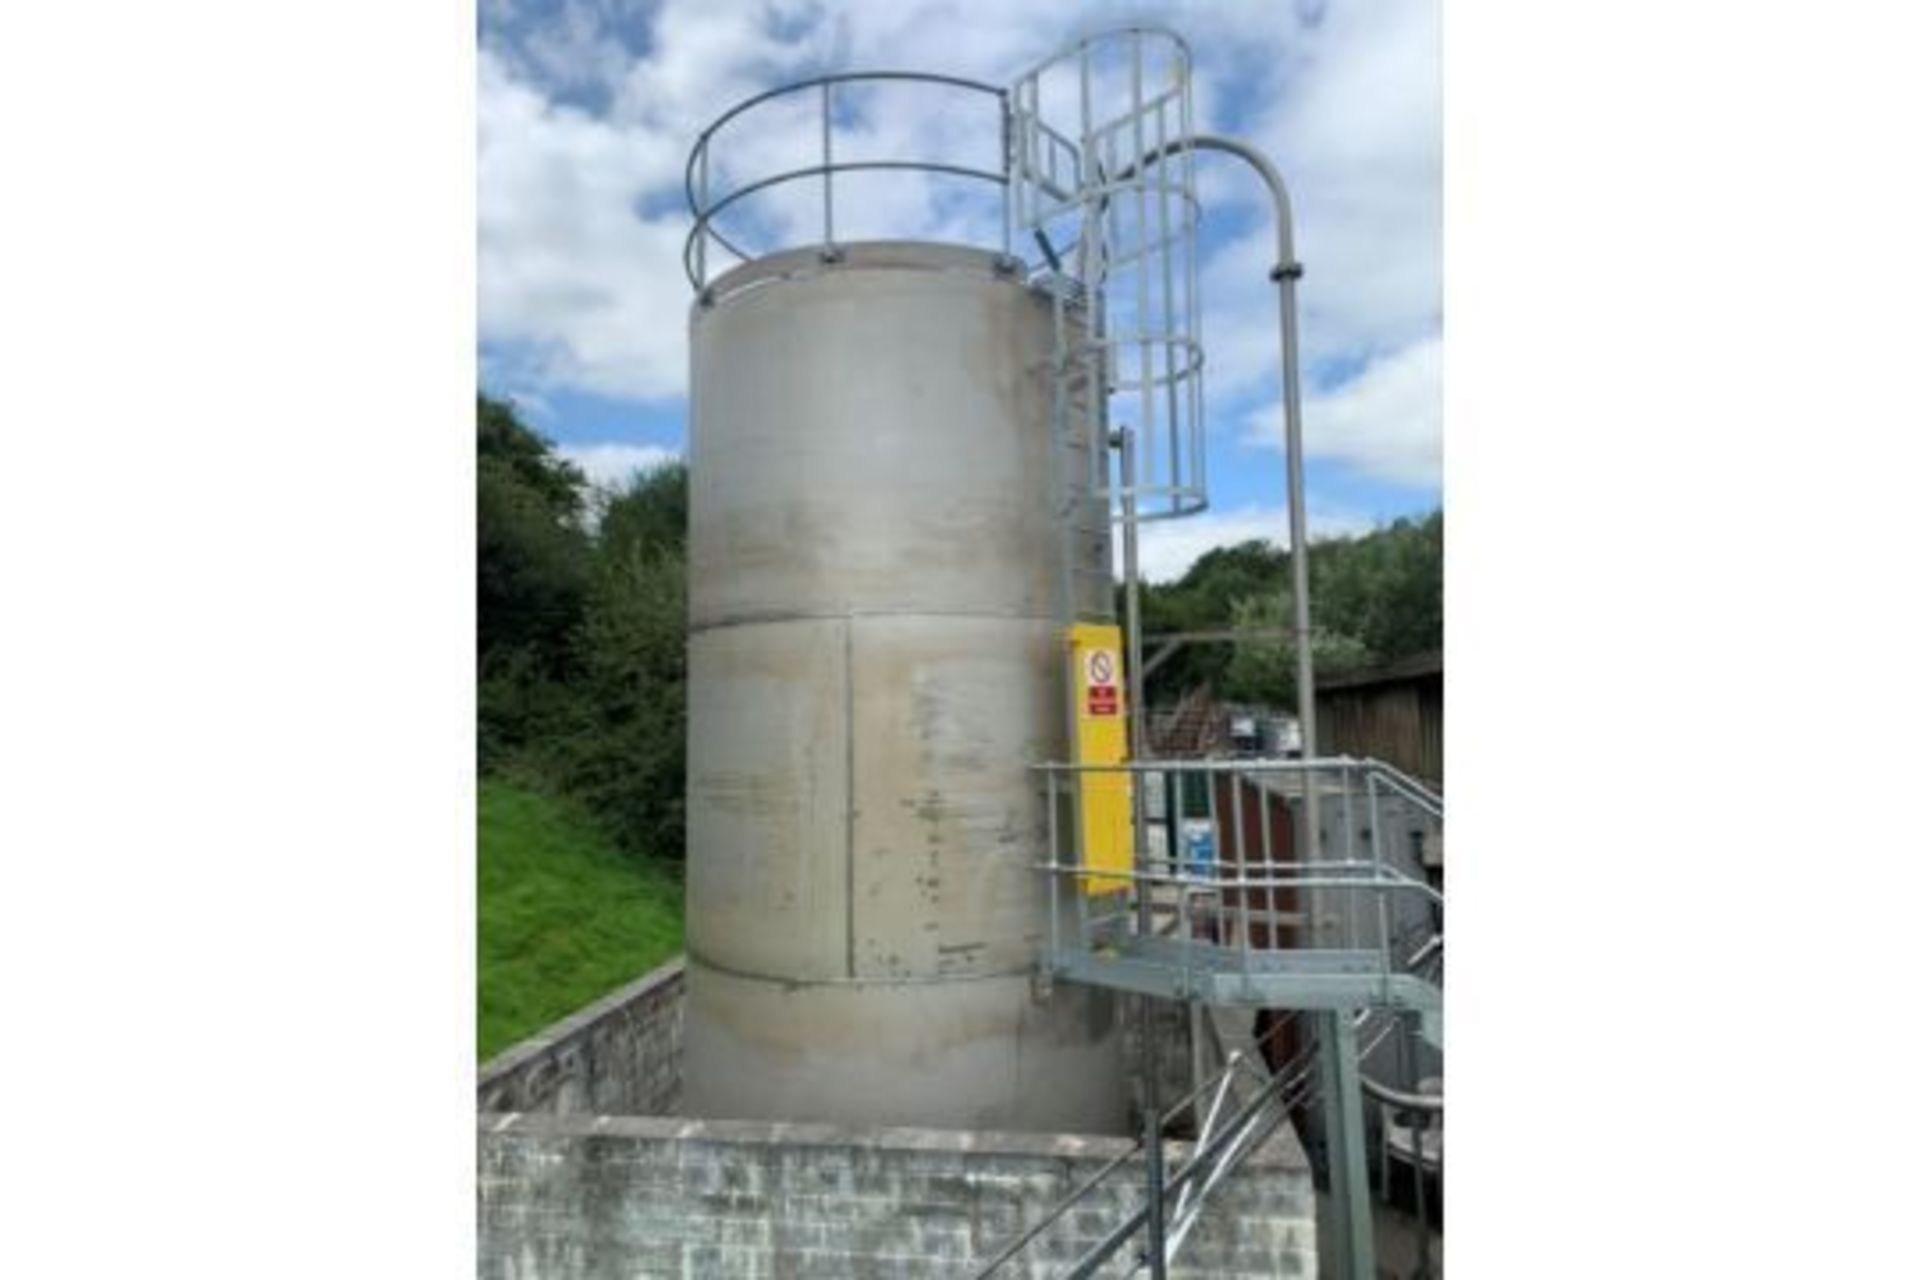 Stainless Steel Tank 32,000 Litre - Image 2 of 3